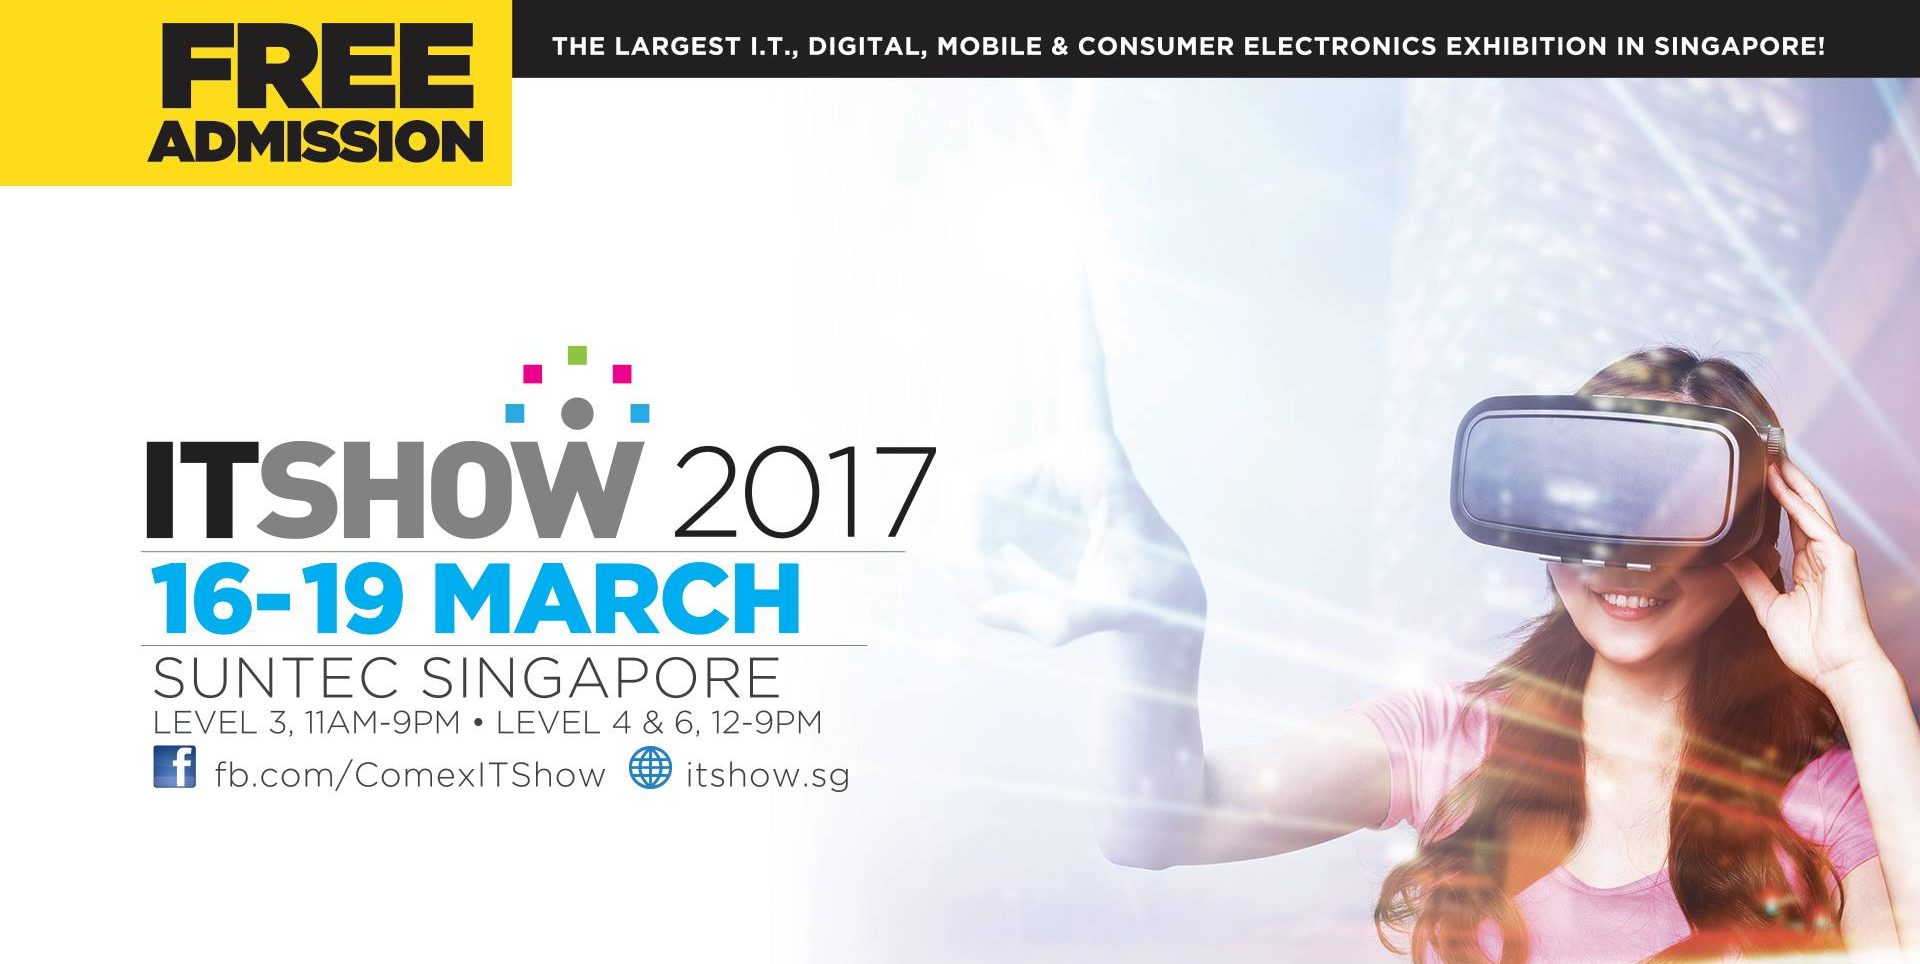 ITShow 2017 at Suntec Singapore with more than 250 Exhibitors Promotion 16-19 Mar 2017